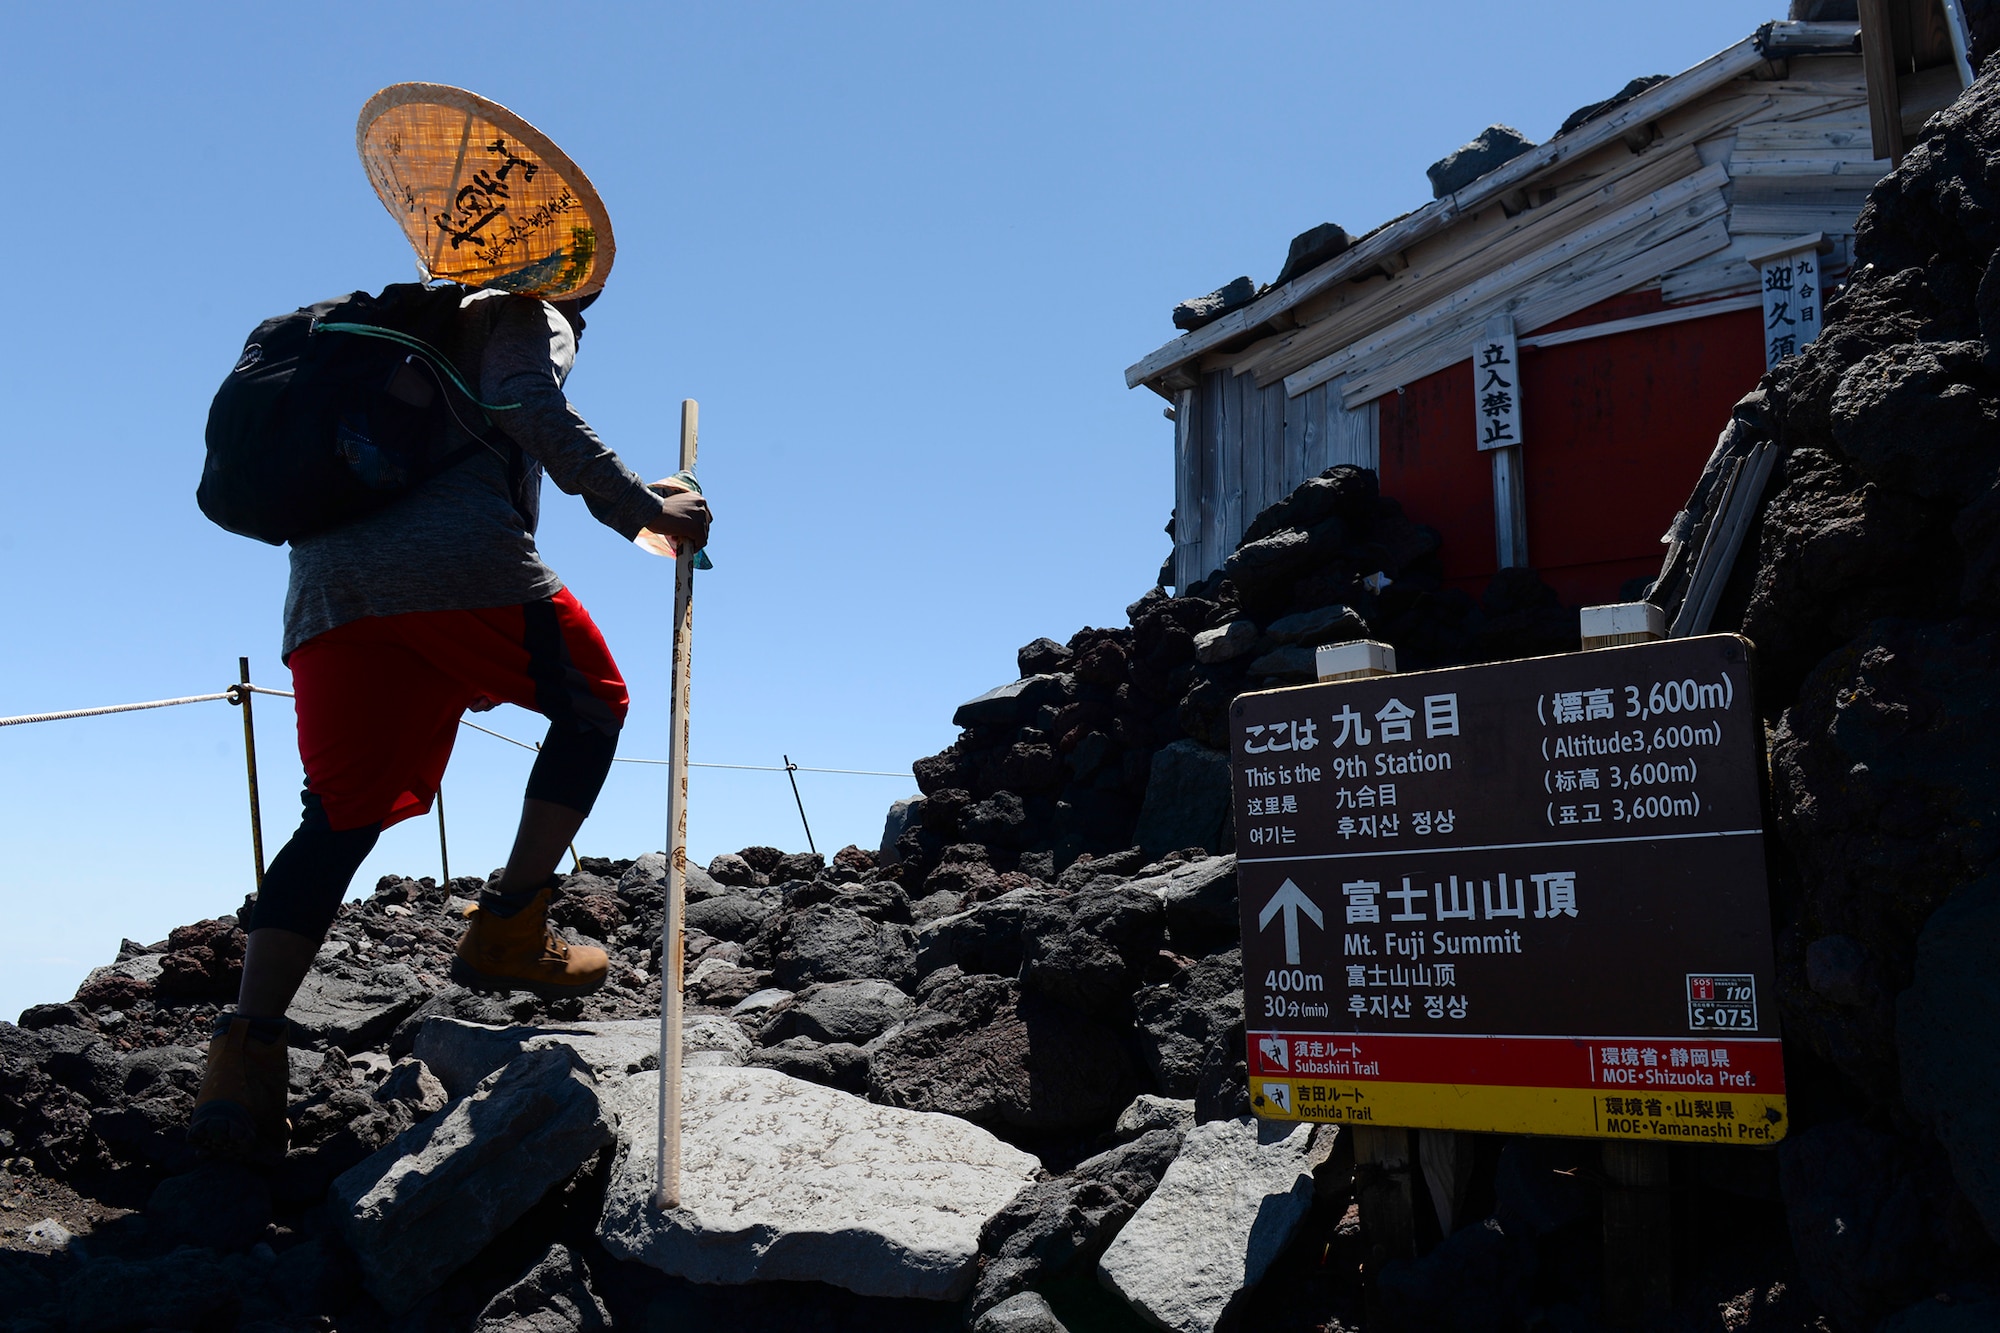 A hiker makes his way past the ninth station of the Yoshida trail on Mount Fuji, Japan, July 11, 2015. To reach the summit of Mount Fuji, hikers had to climb over 5,000 feet, taking anywhere from three to seven hours. Airmen from Yokota Air Base used teamwork and resiliency to make sure that all members returned safely from the mountain. (U.S. Air Force photo/Airman 1st Class Elizabeth Baker)